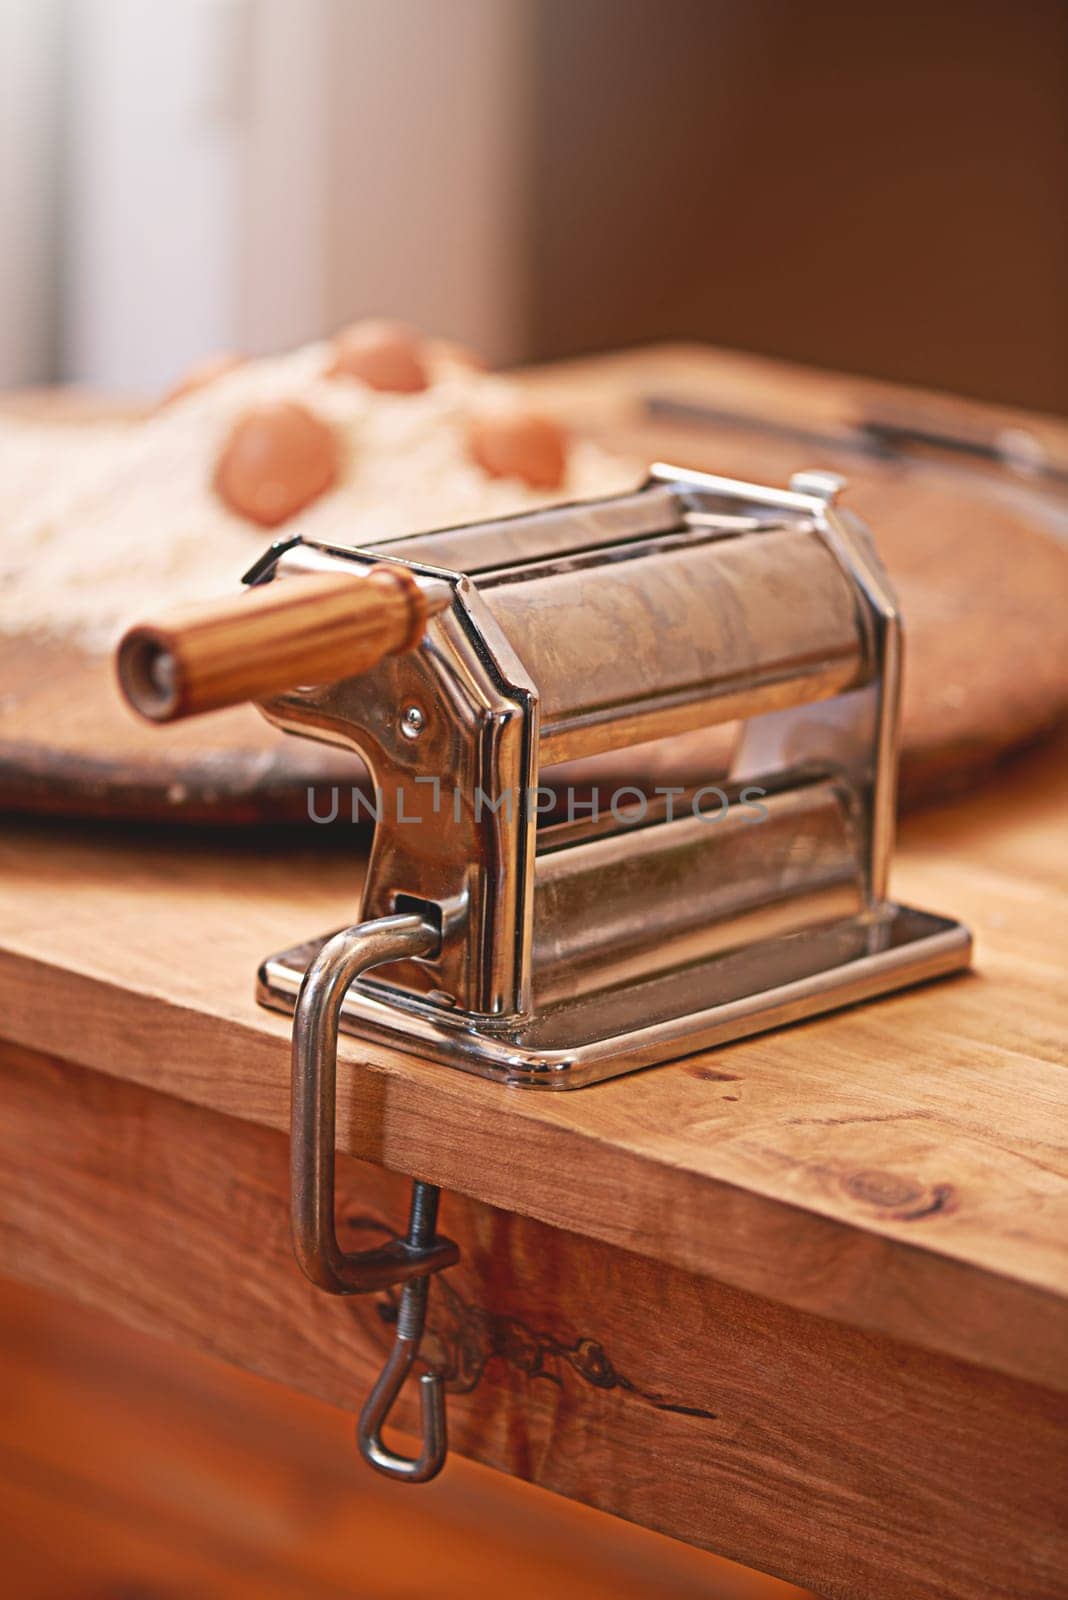 Cooking, dough and pasta maker in kitchen on table, counter and wooden board for cuisine. Food, baking and culinary tool, machine or utensil for flour, ingredients and eggs for homemade noodles.